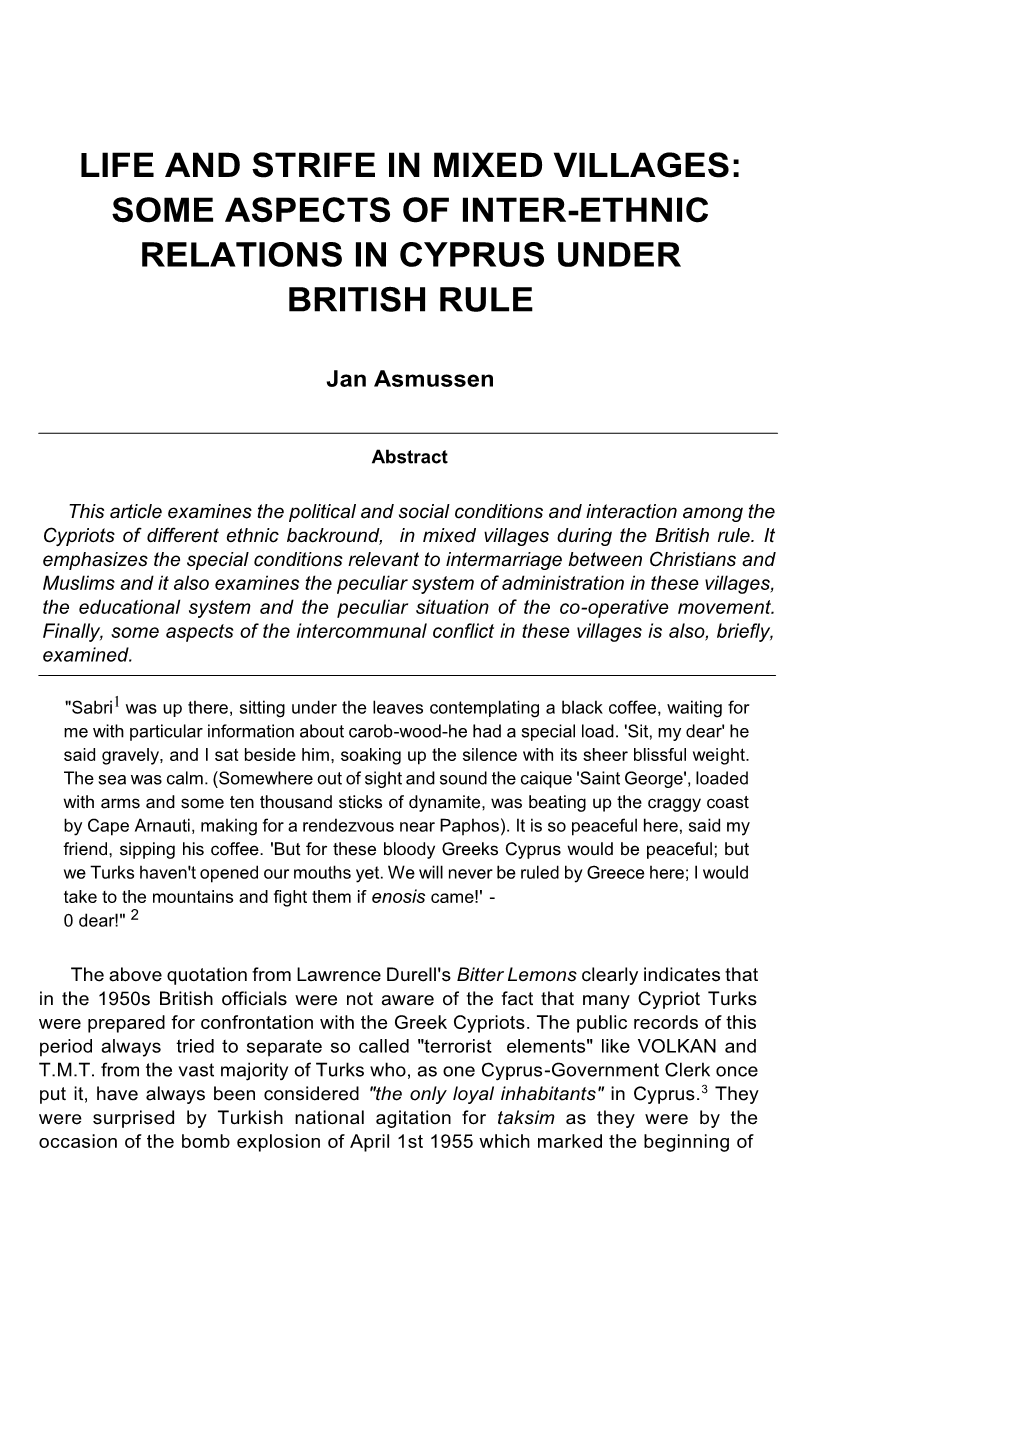 Some Aspects of Inter-Ethnic Relations in Cyprus Under British Rule